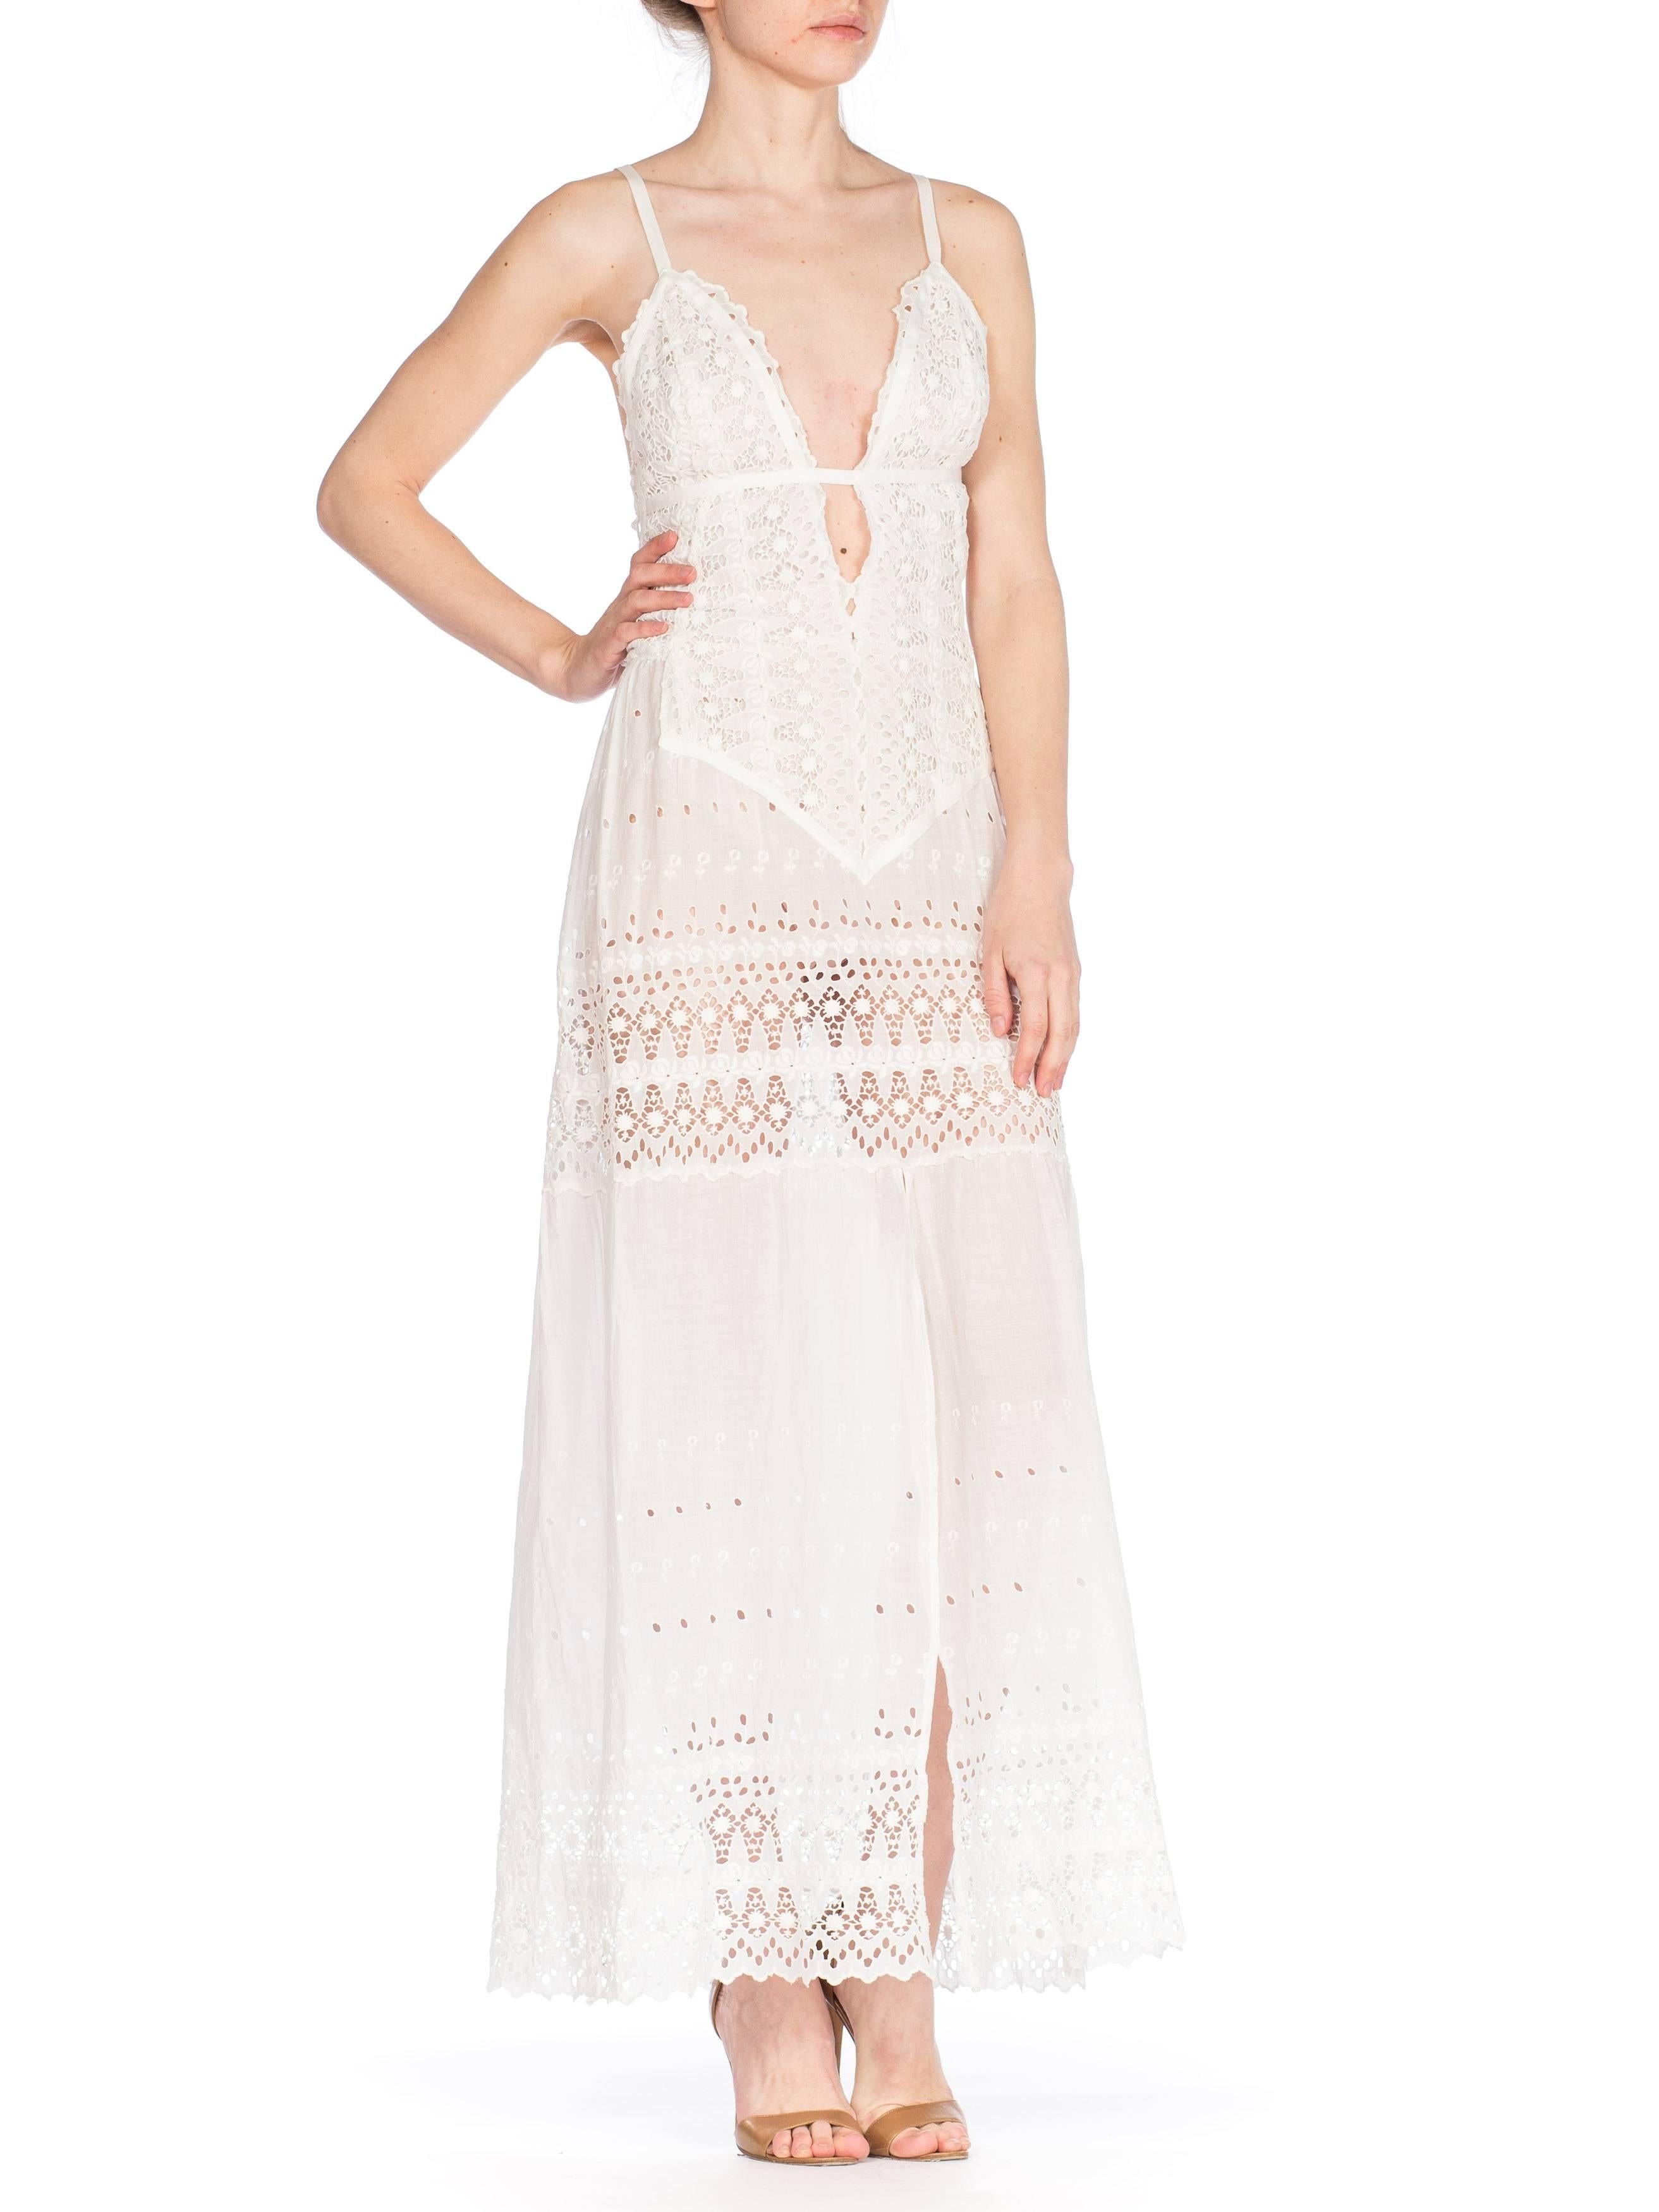 Women's White Cotton Victorian Eyelet  Embroidered Lace Maxi Dress